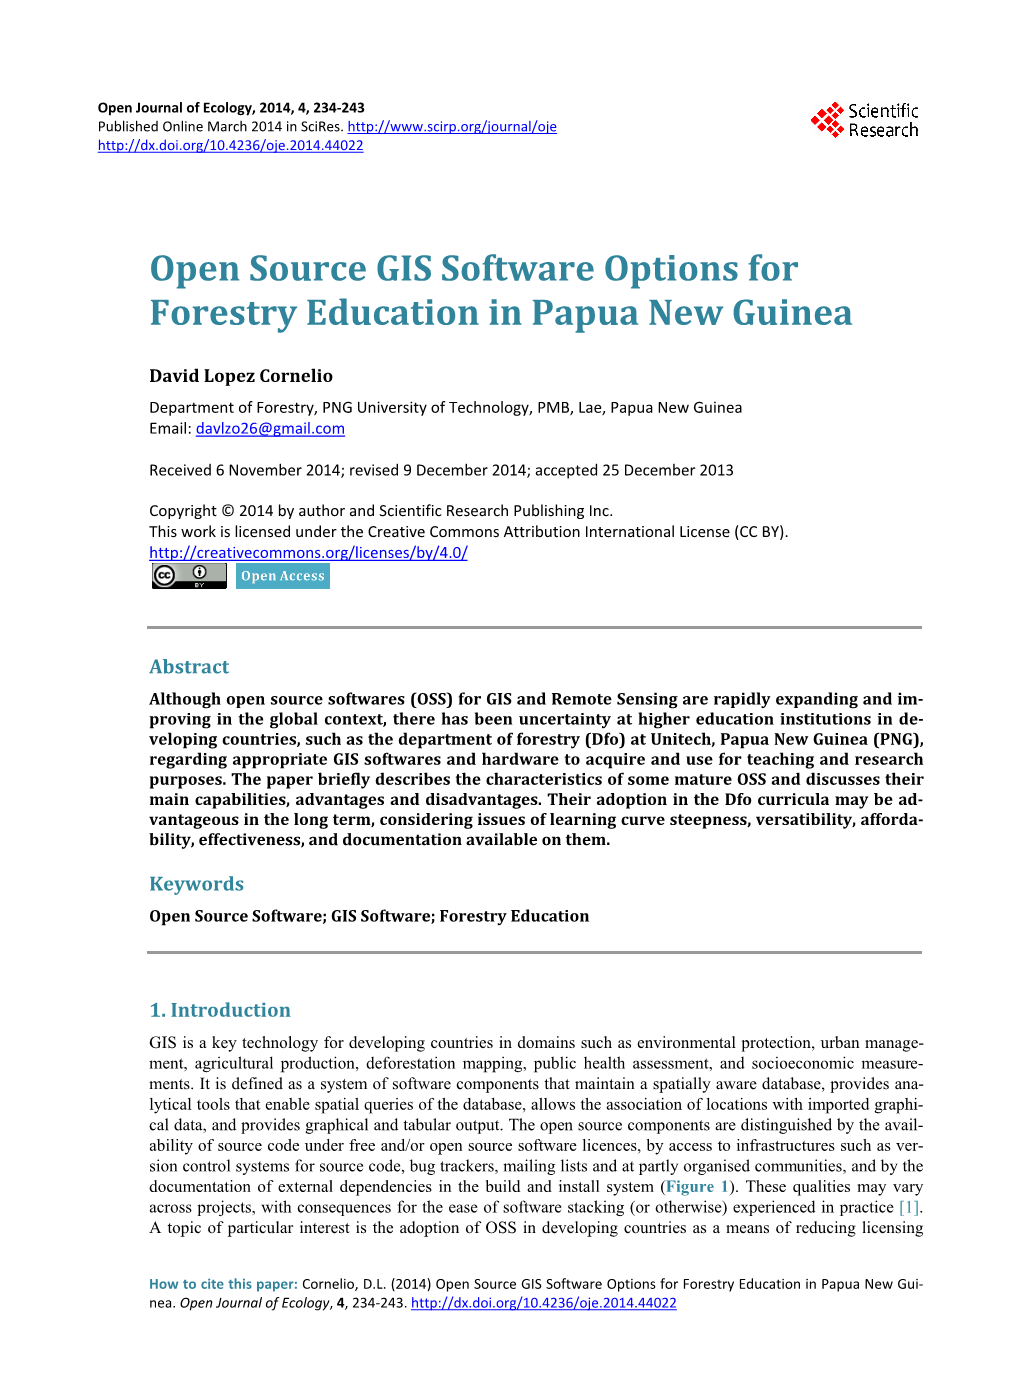 Open Source GIS Software Options for Forestry Education in Papua New Guinea